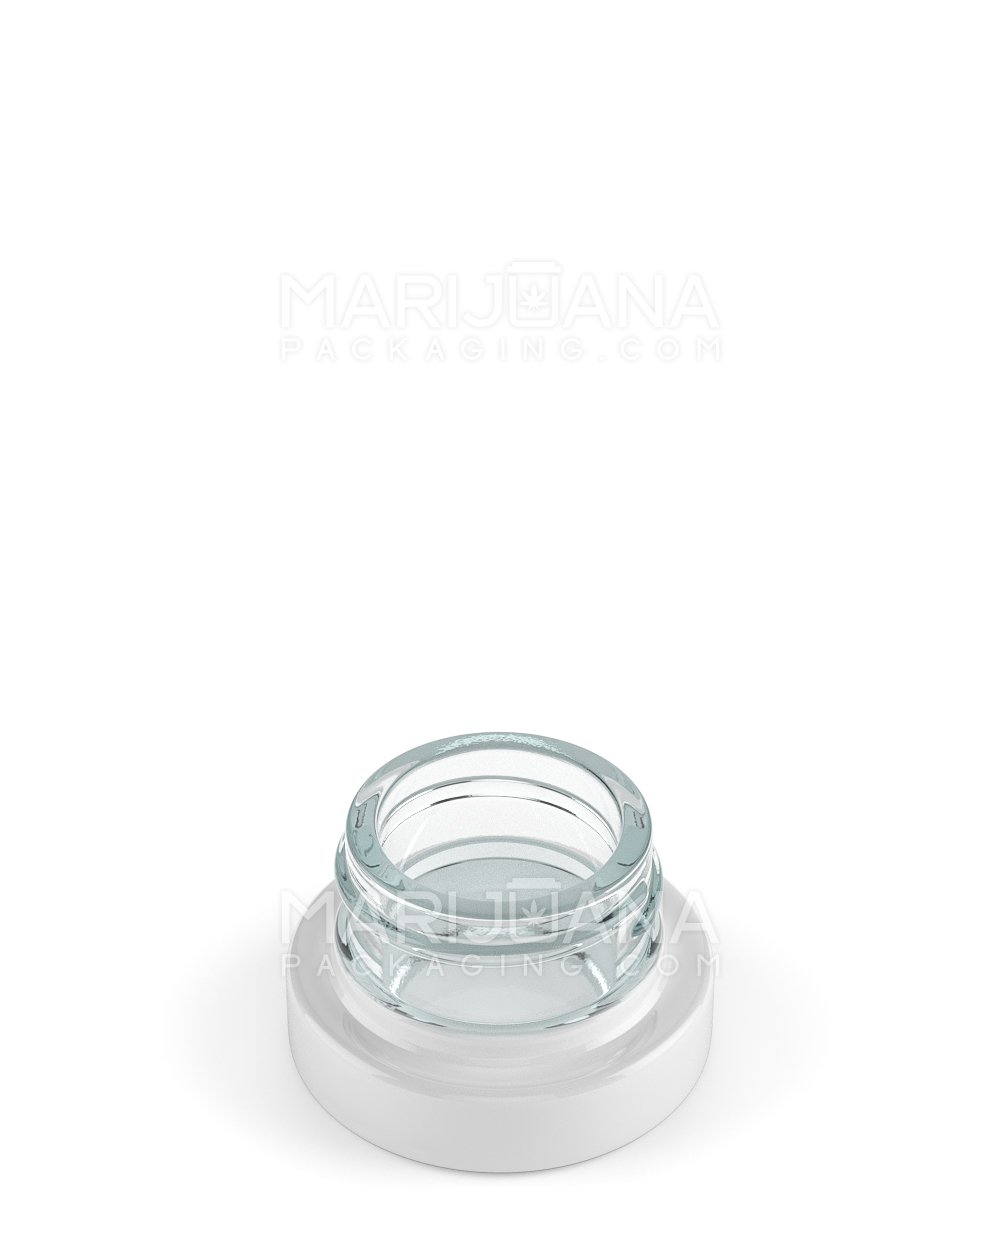 White Glass Concentrate Containers | 28mm - 5mL - 400 Count - 2